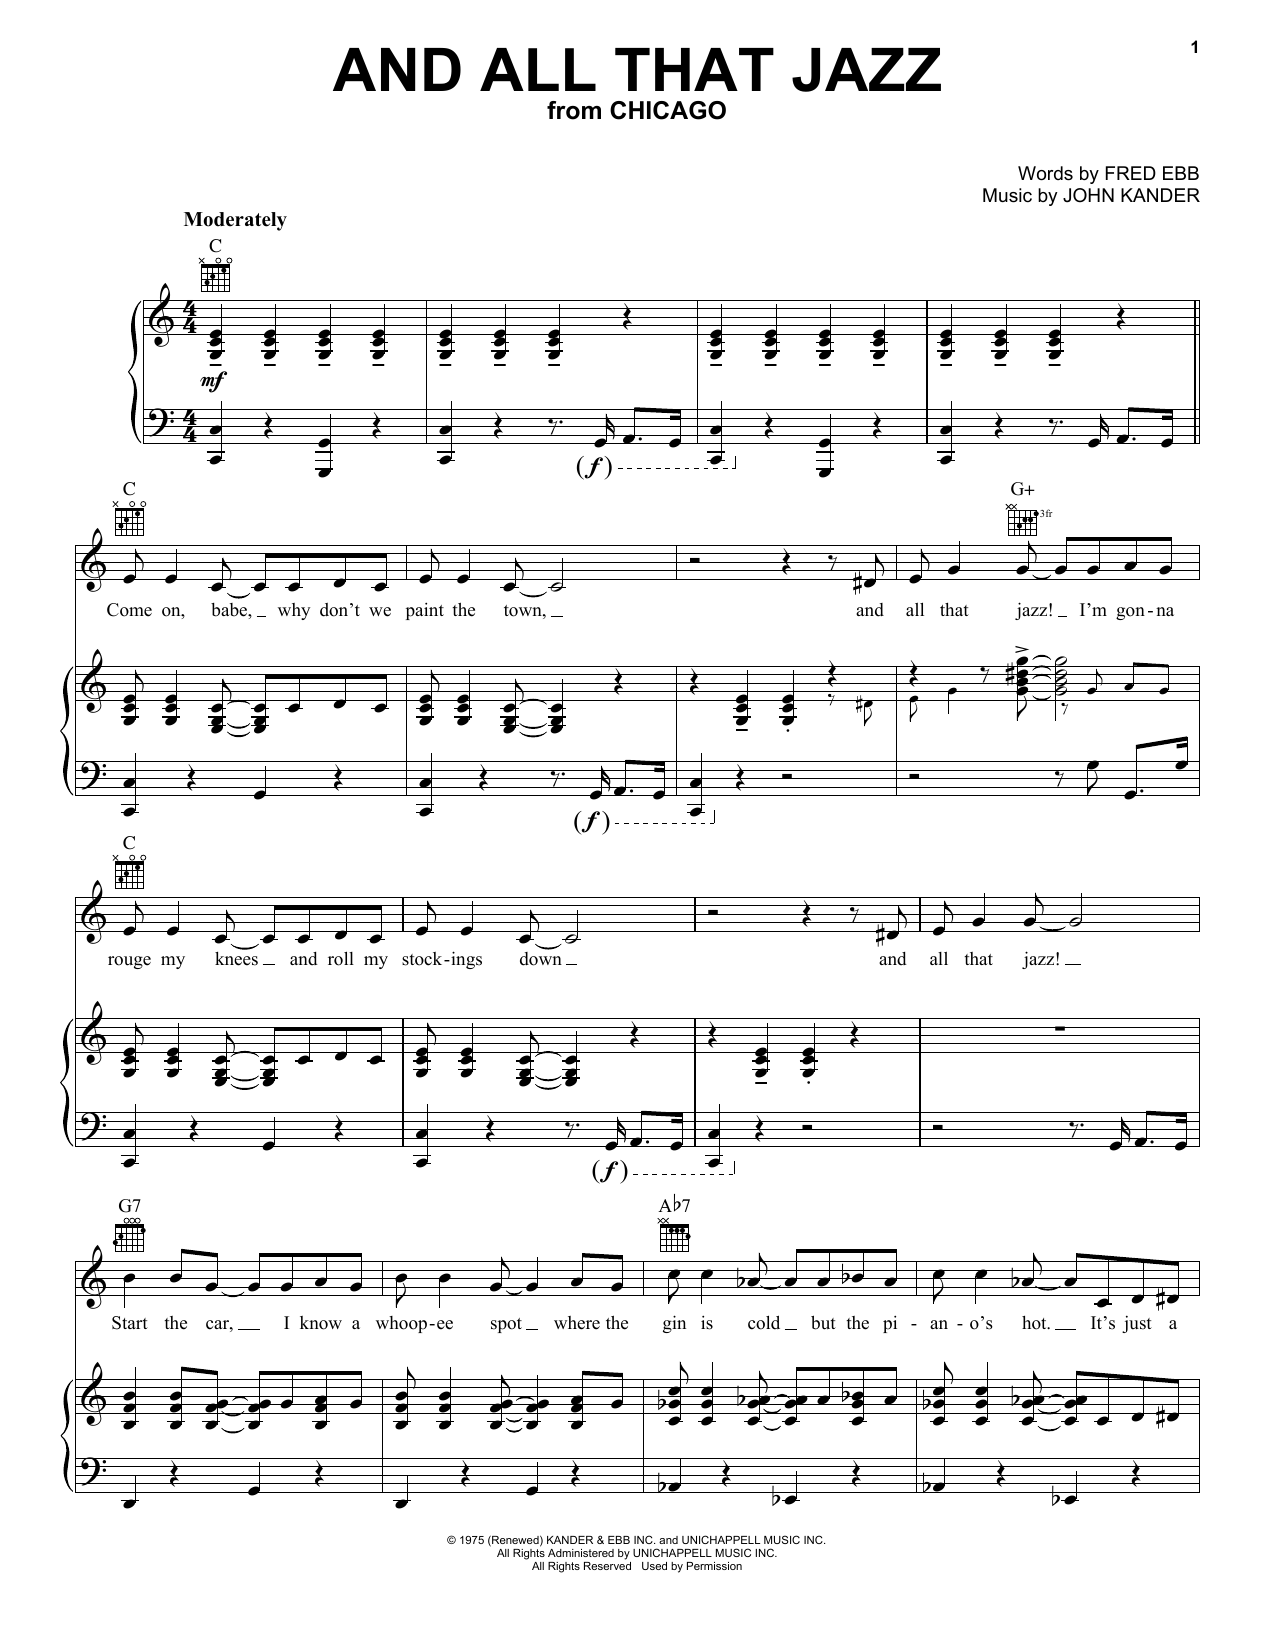 Kander & Ebb And All That Jazz sheet music notes and chords. Download Printable PDF.